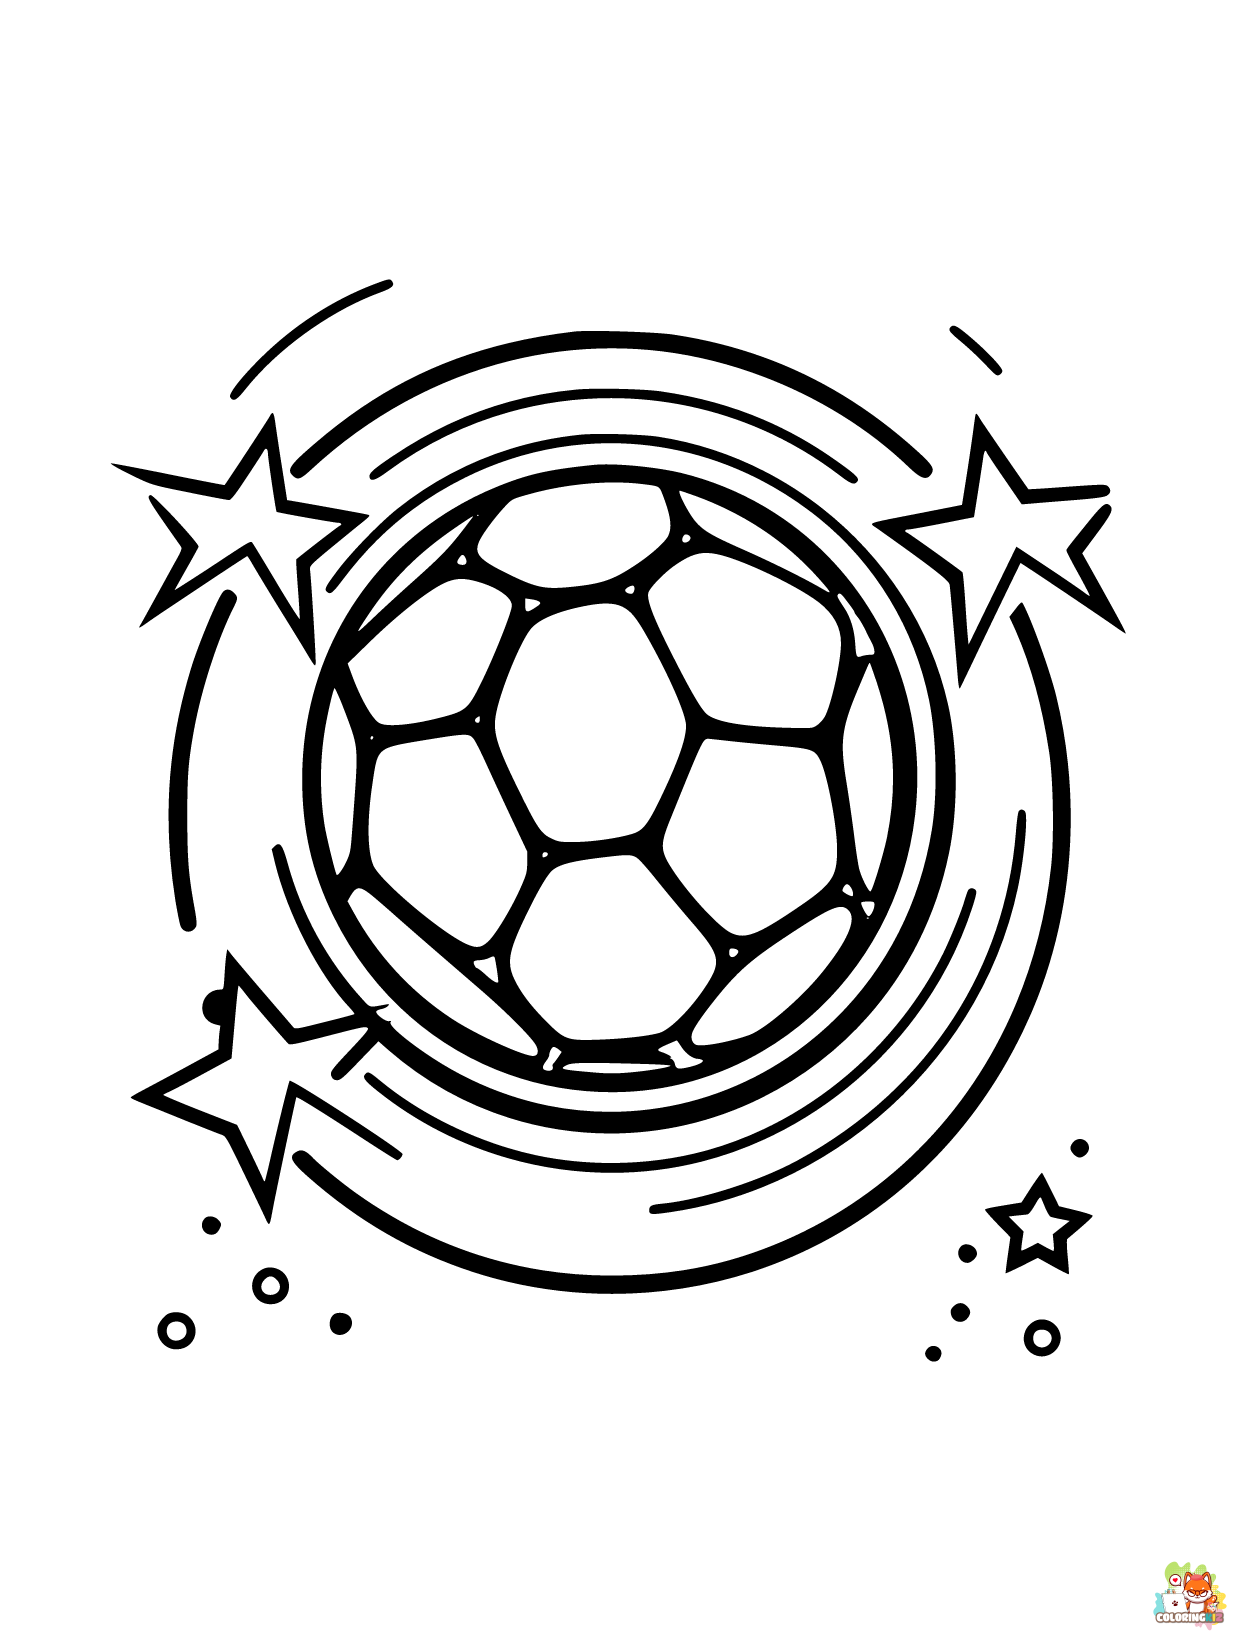 Soccer coloring pages to print